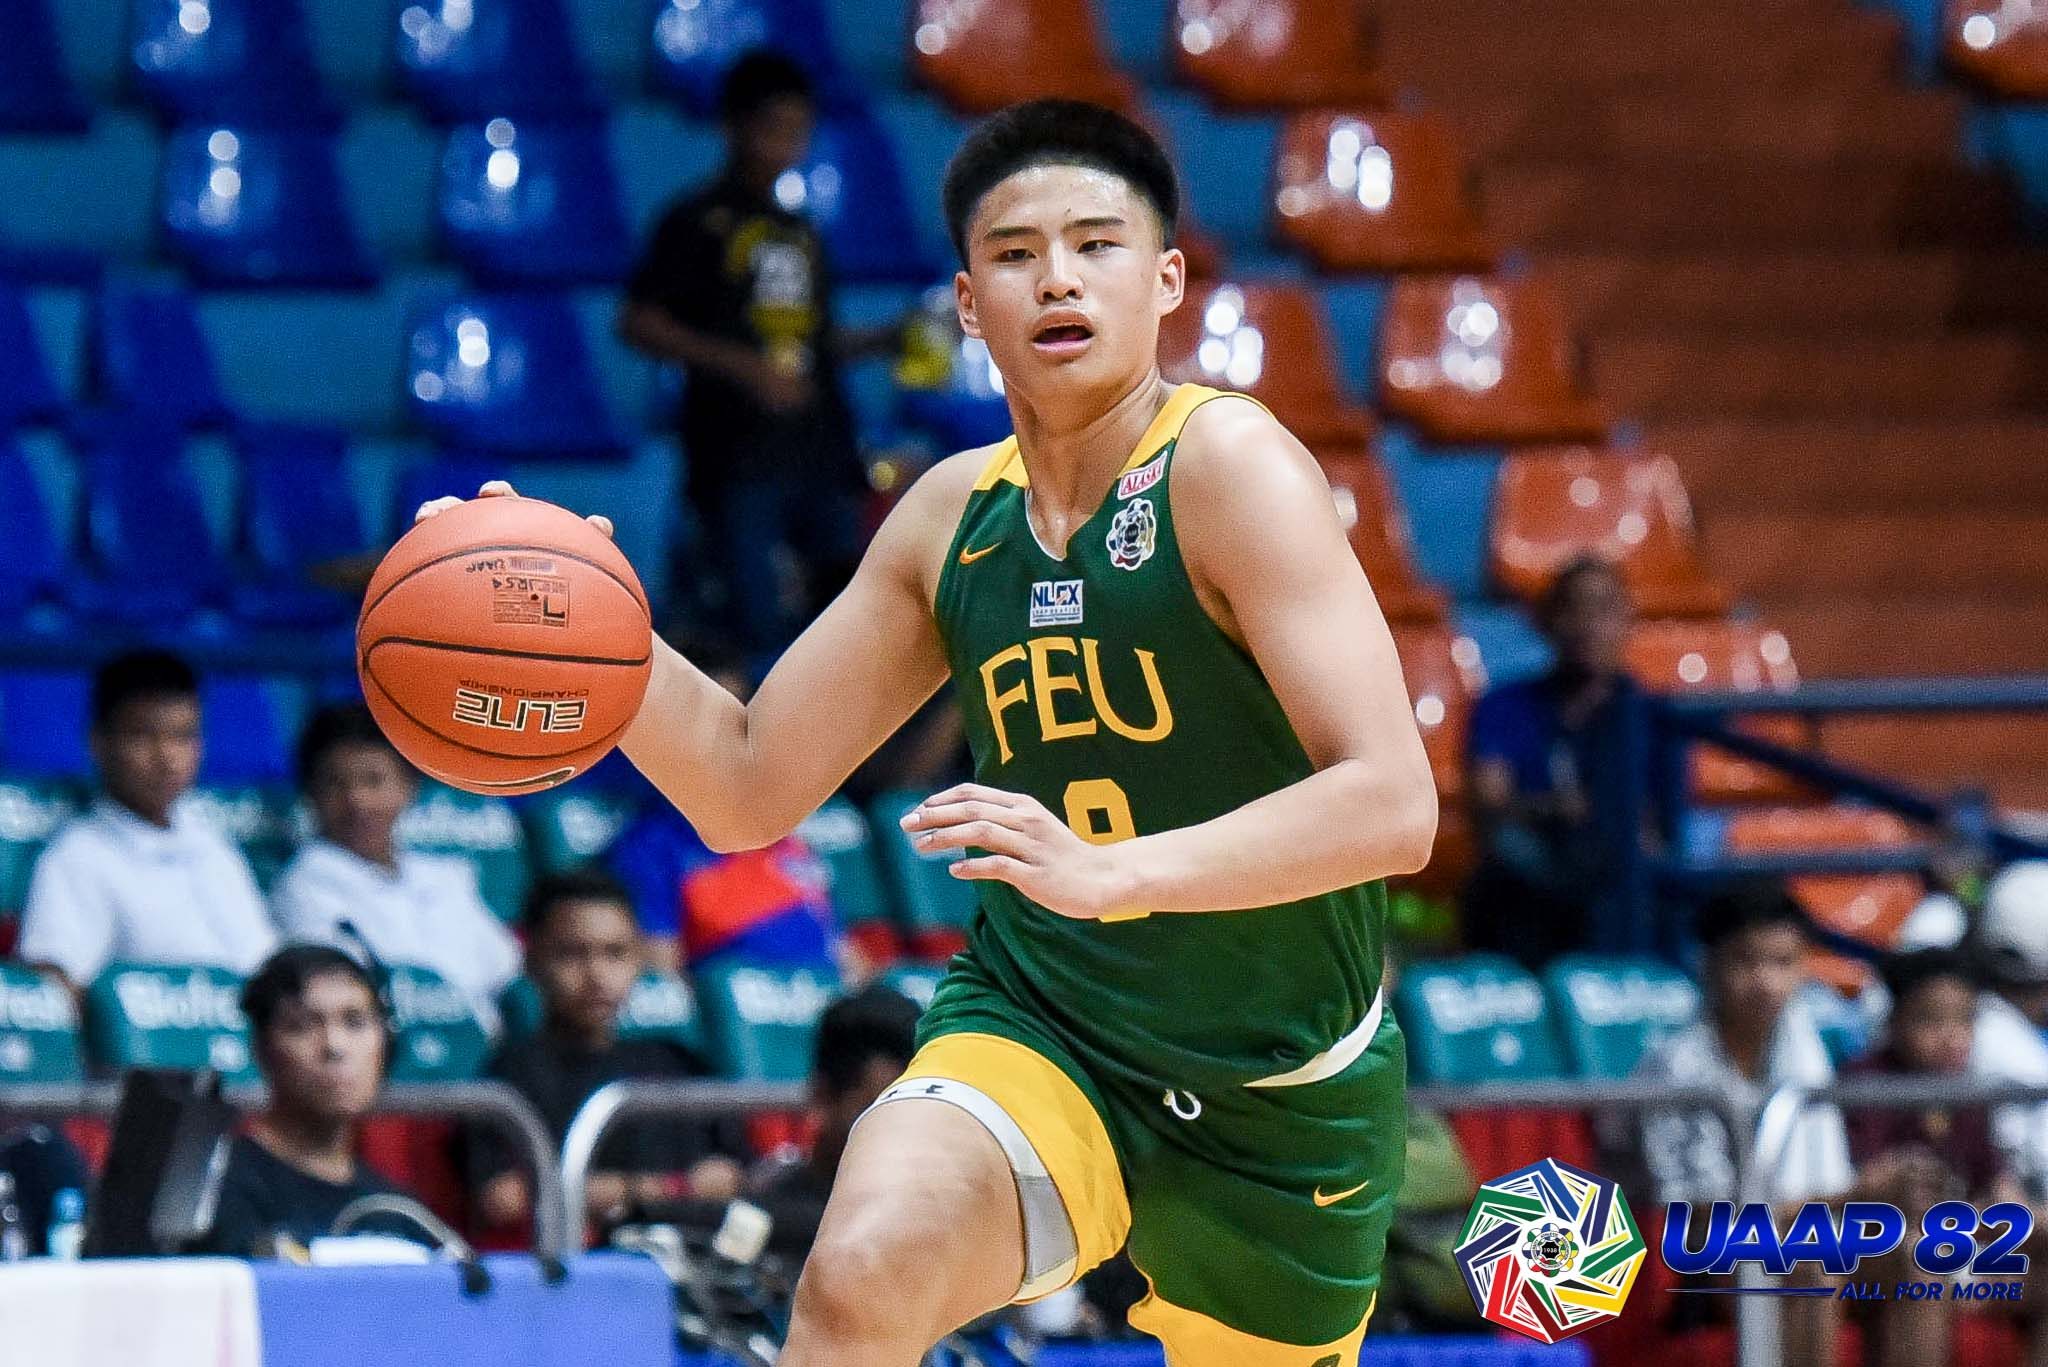 FEU’s Cholo Anonuevo to train in the US with Kai Sotto